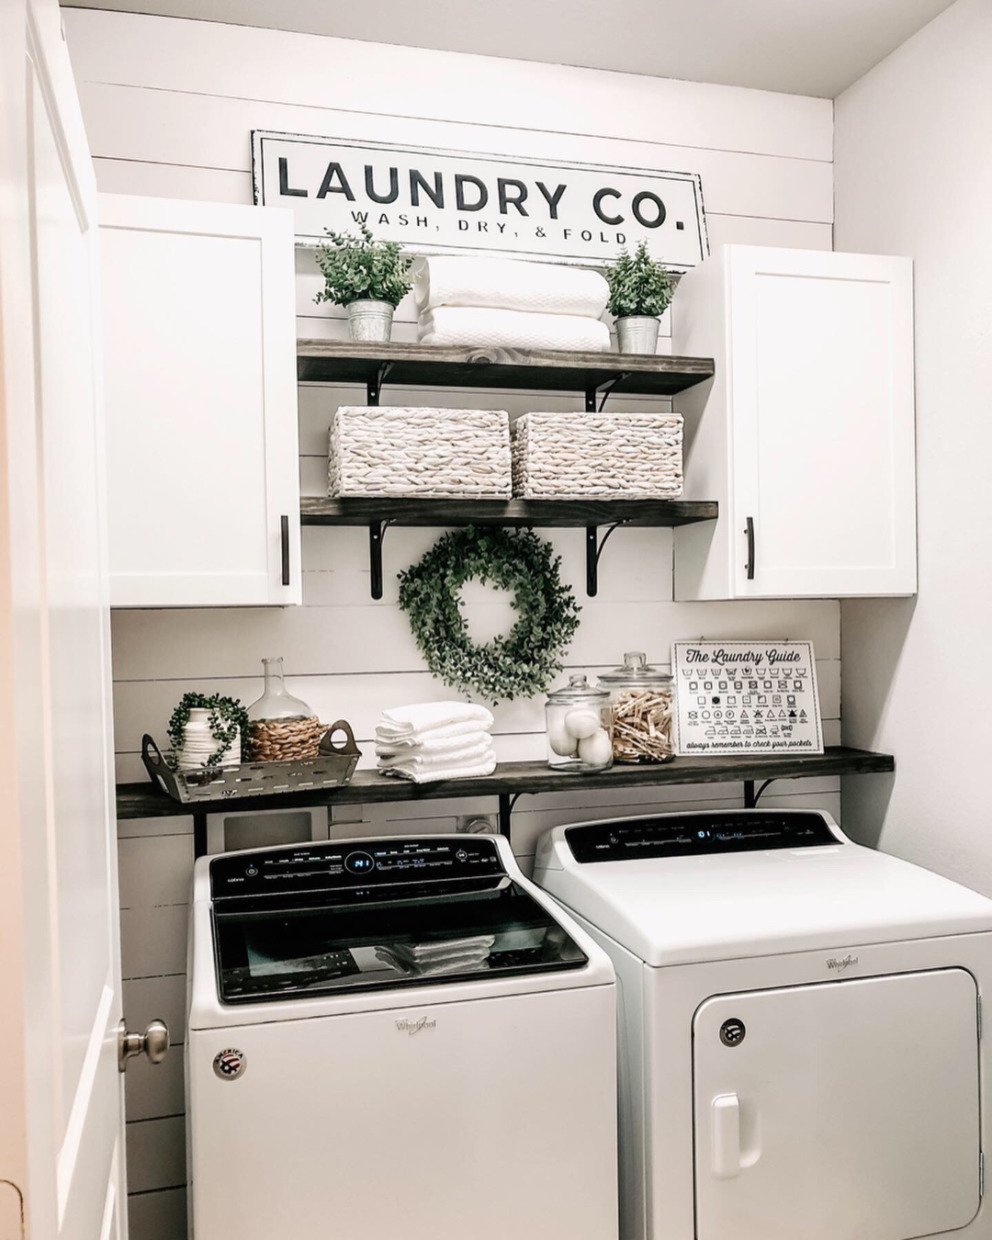 Laundry Room Sign – Guest Blog by: A Blessed Home | CraftCuts.com - Laundry Room Sign – Guest Blog by: A Blessed Home | CraftCuts.com -   12 diy Room renovation ideas